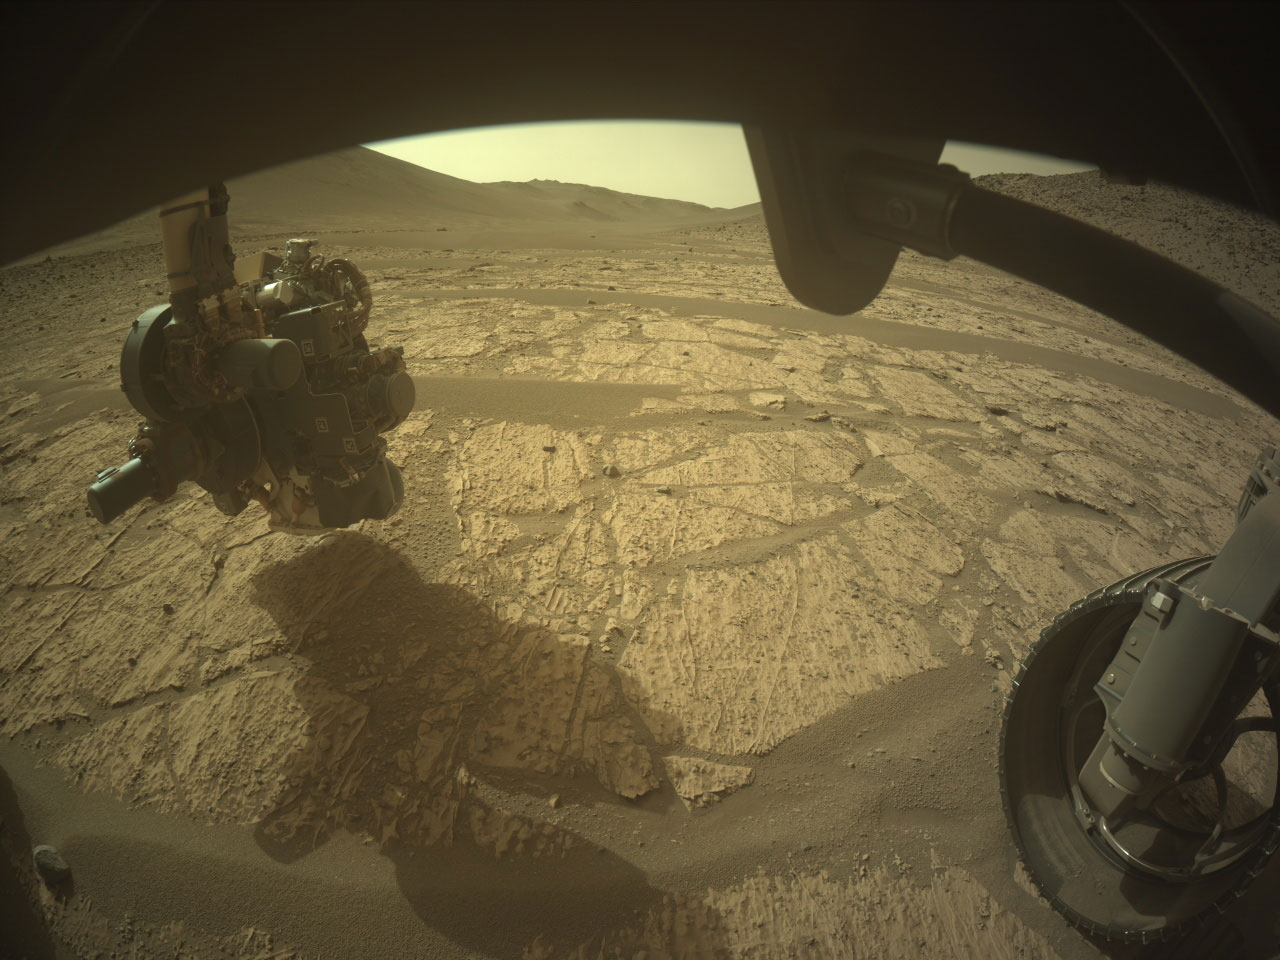 This image was acquired by the Front Right Hazard Avoidance Camera A on June 16, 2024 (Sol 1181) at the local mean solar time of 14:20:10. The image shows the area in front of the rover at Bright Angel with the arm extended as the PIXL instrument investigates the surface.